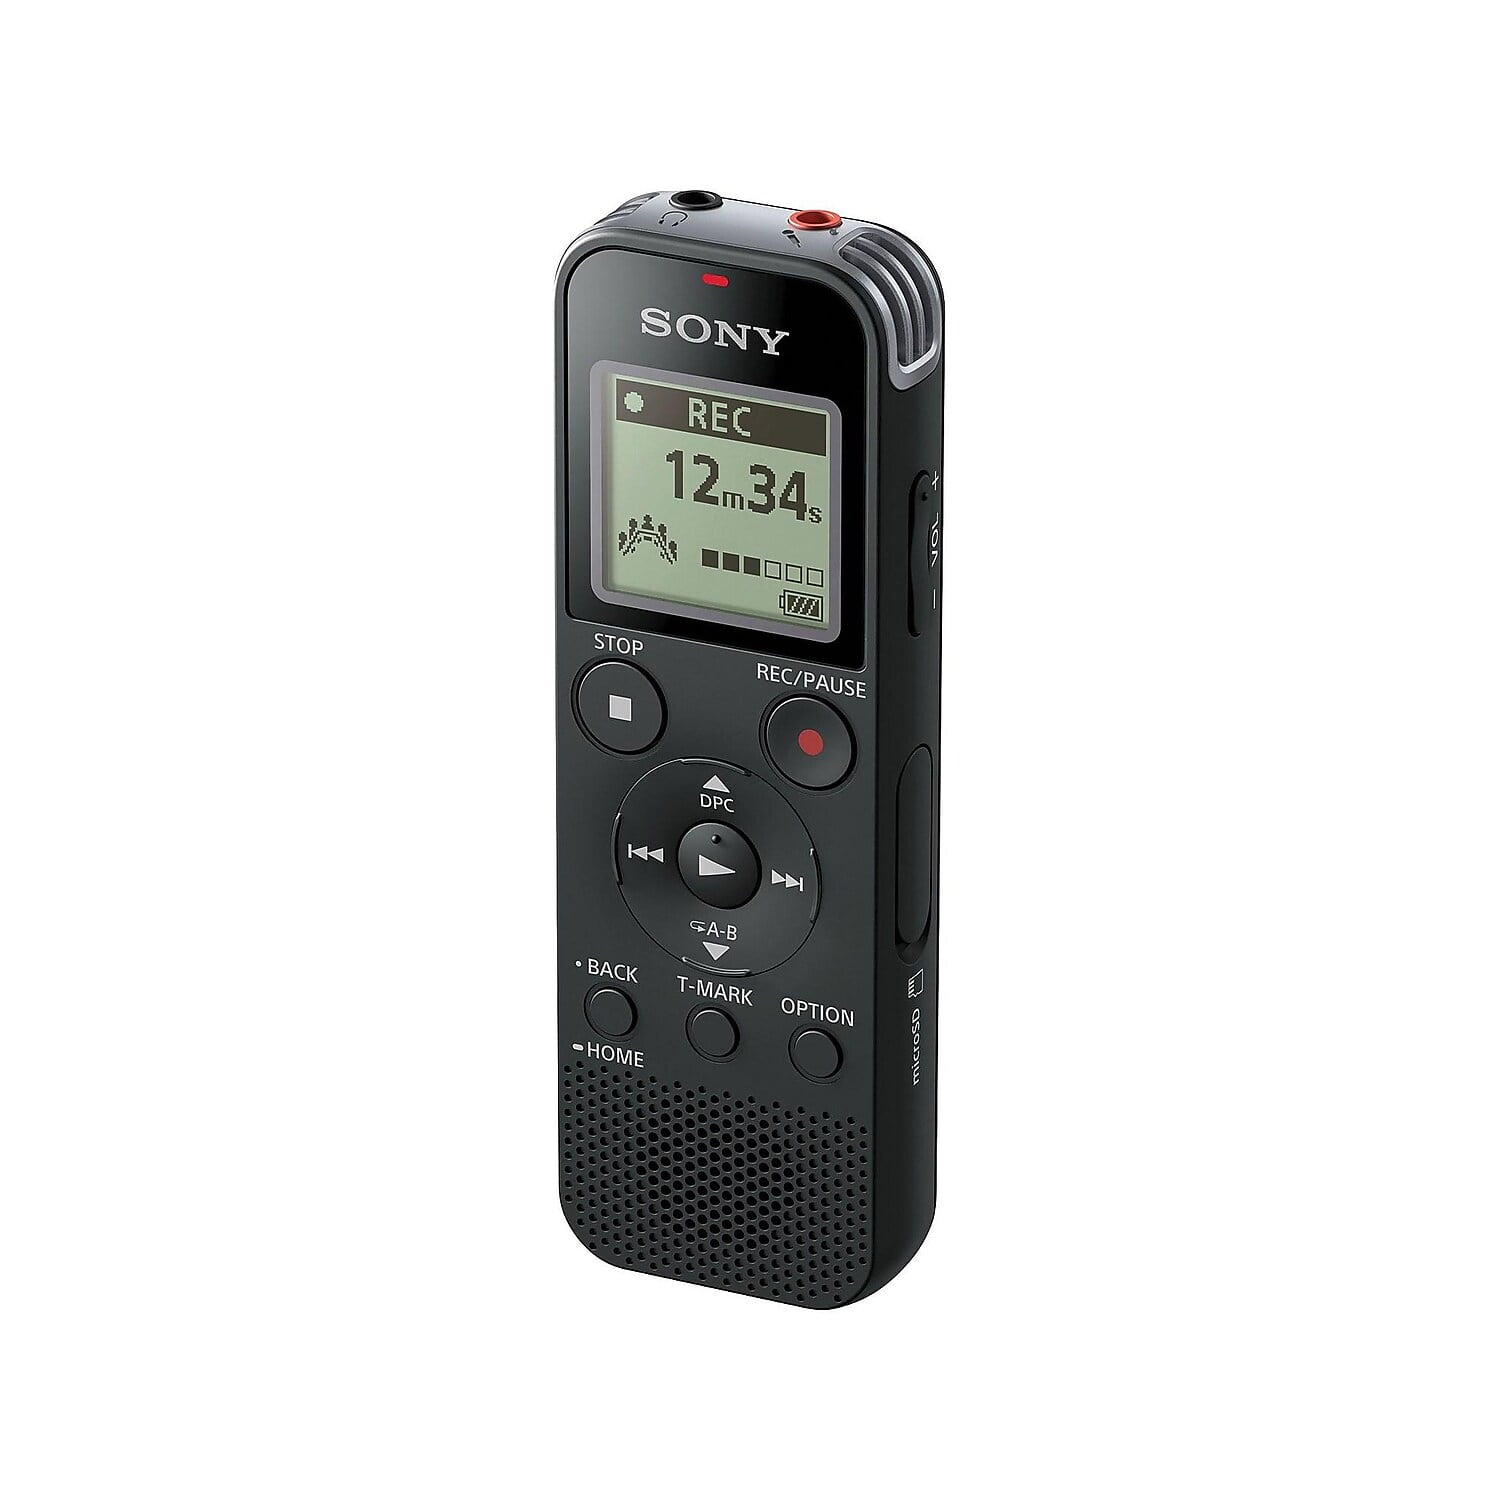 SONY ICD-PX470 Stereo Digital Voice Recorder with Built-in USB 